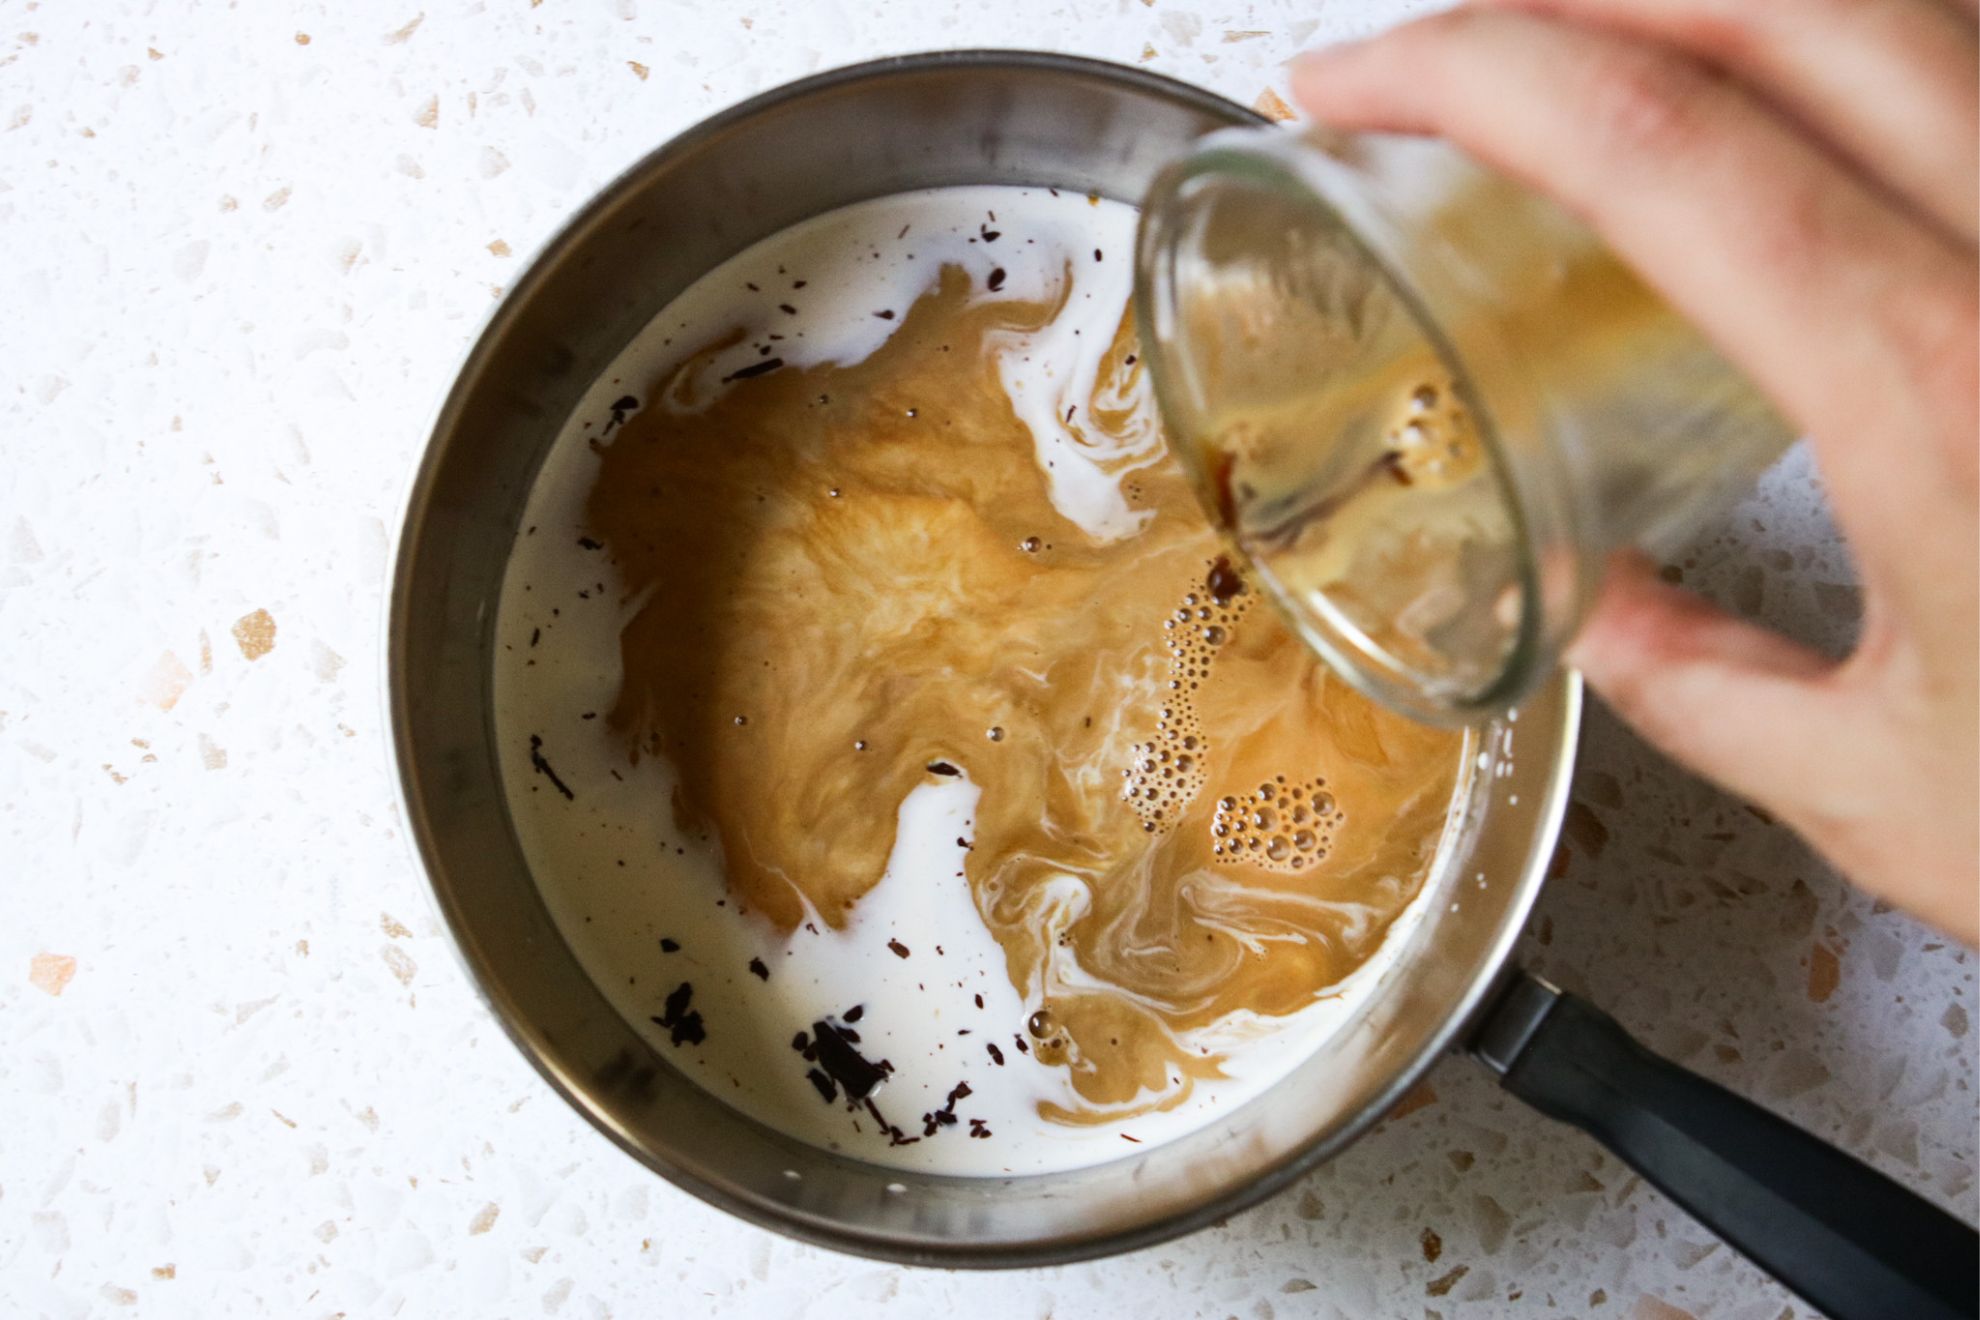 This is an overhead horizontal image of a stainless steel saucepan with milk and espresso being poured into it. A hand is coming in from the right side of the image tilting a small glass cup of espresso and pouring it into the saucepan. The pan sits on a white and tan terrazzo surface.